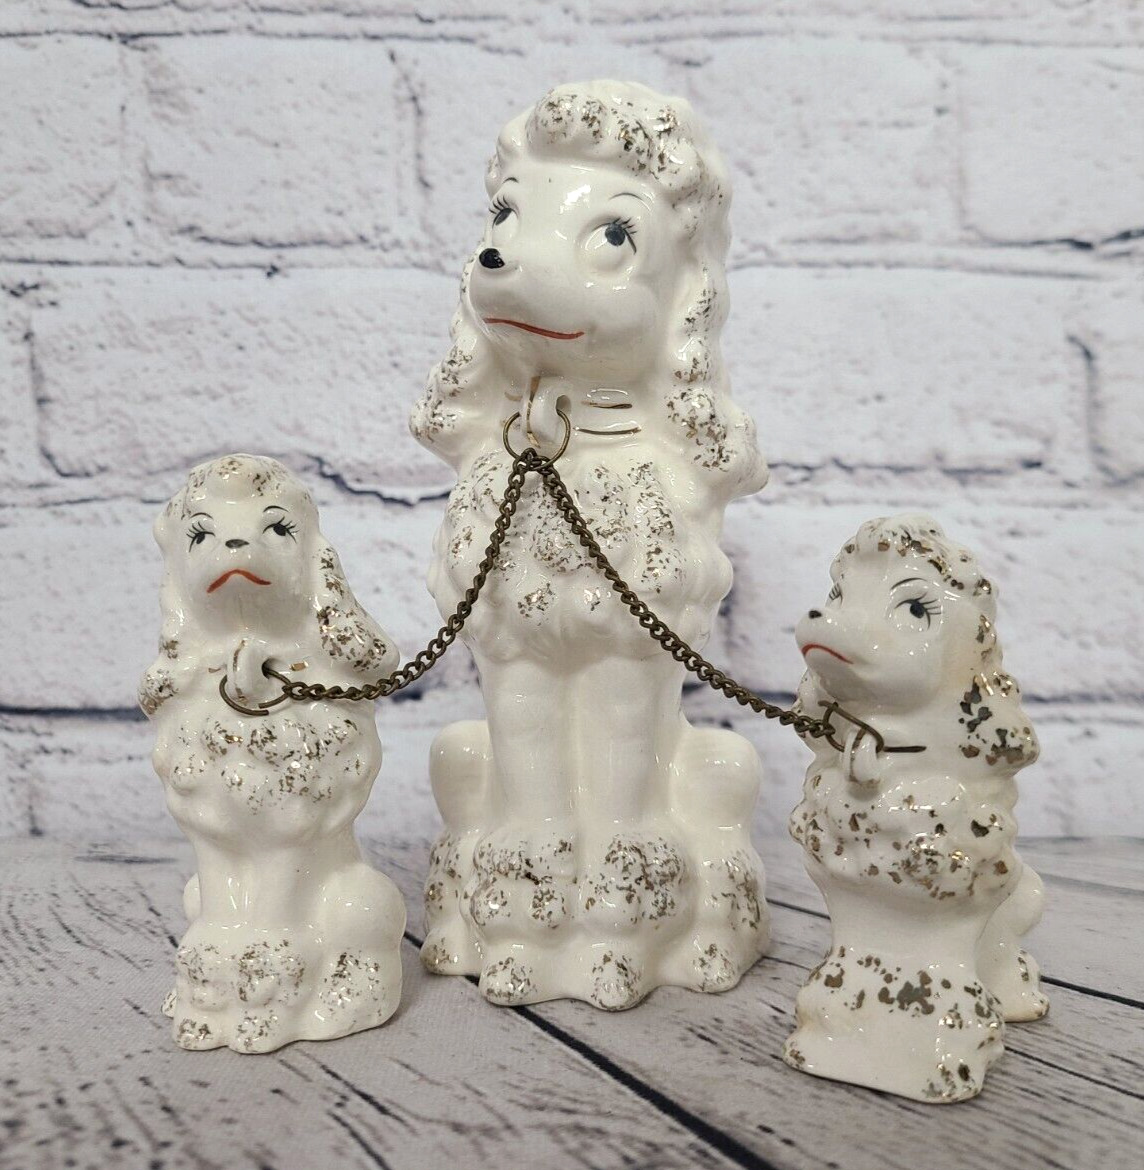 Vtg 1960s Mid Century Ceramic Poodle Dog Mom with Puppies Chain Family Figurines